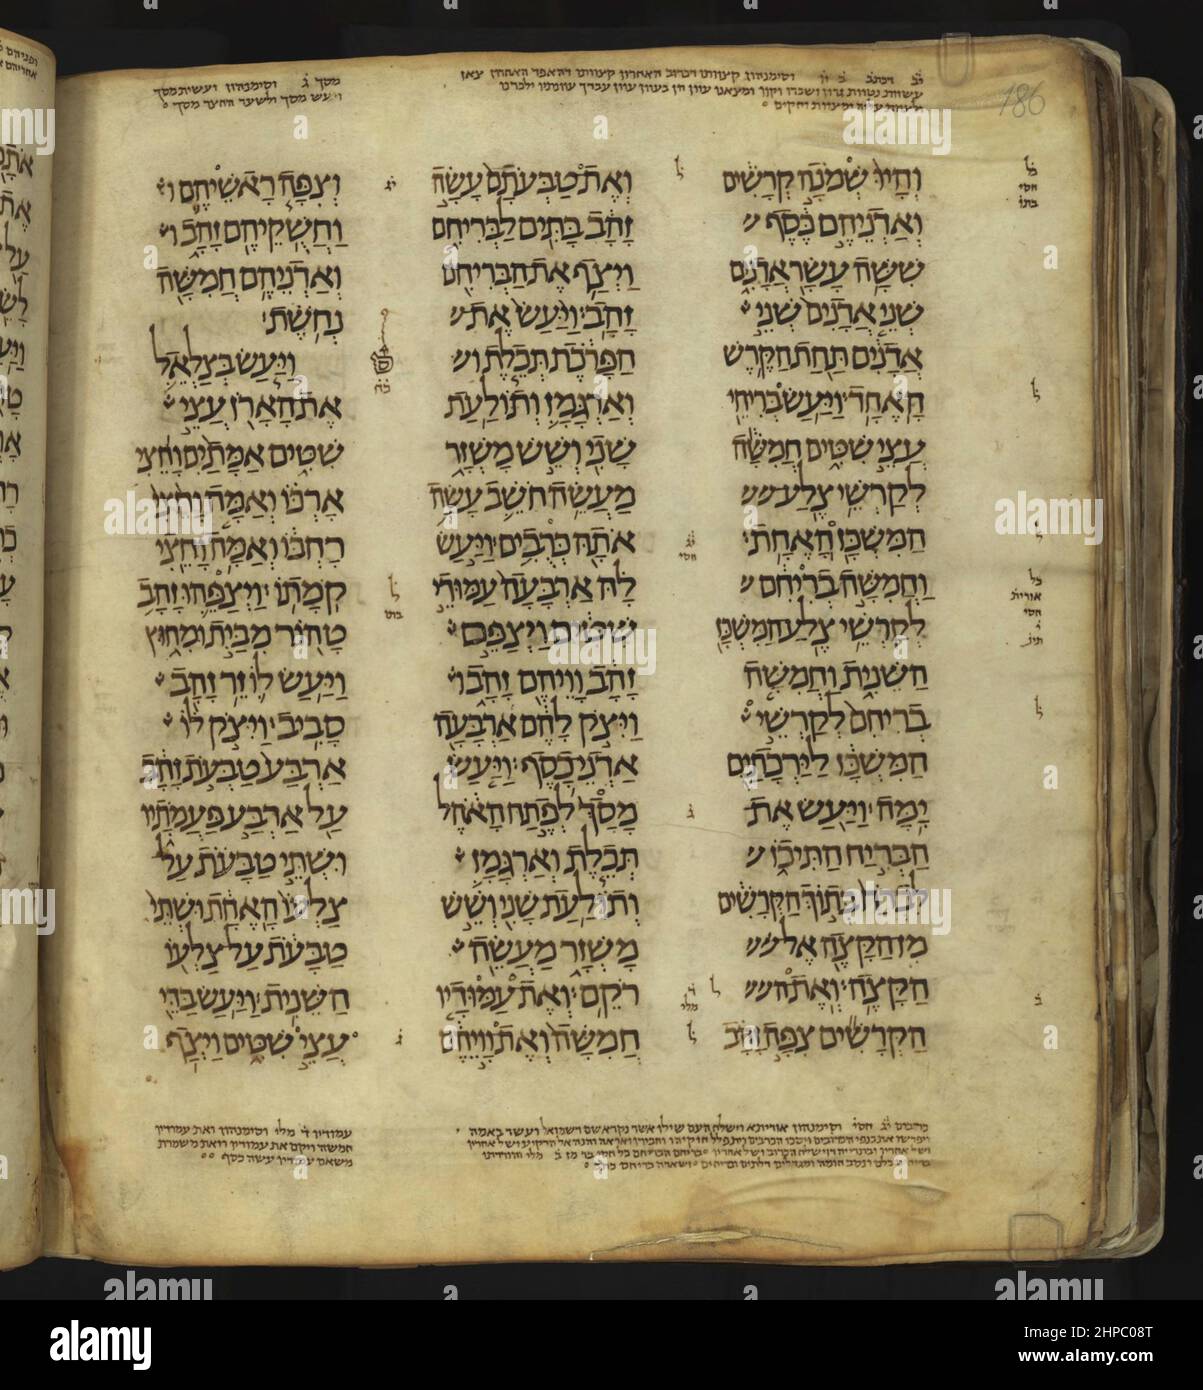 The Damascus Pentateuch (Keter Dameseq or Crown of Damascus) is a 10th-century Hebrew Bible codex, consisting of the almost complete Pentateuch, the Five Books of Moses. he codex was copied by an unknown scribe, replete with Masoretic annotations. The manuscript is defective in its beginning, as it starts with Genesis 9:26, and Exodus 18:1–23 is also missing. In 1975 it was acquired by the Jewish National and University Library, Jerusalem, which in 2008 changed its name to 'National Library of Israel'. The codex was published in a large, two-volume facsimile edition in 1978. It should not be c Stock Photo